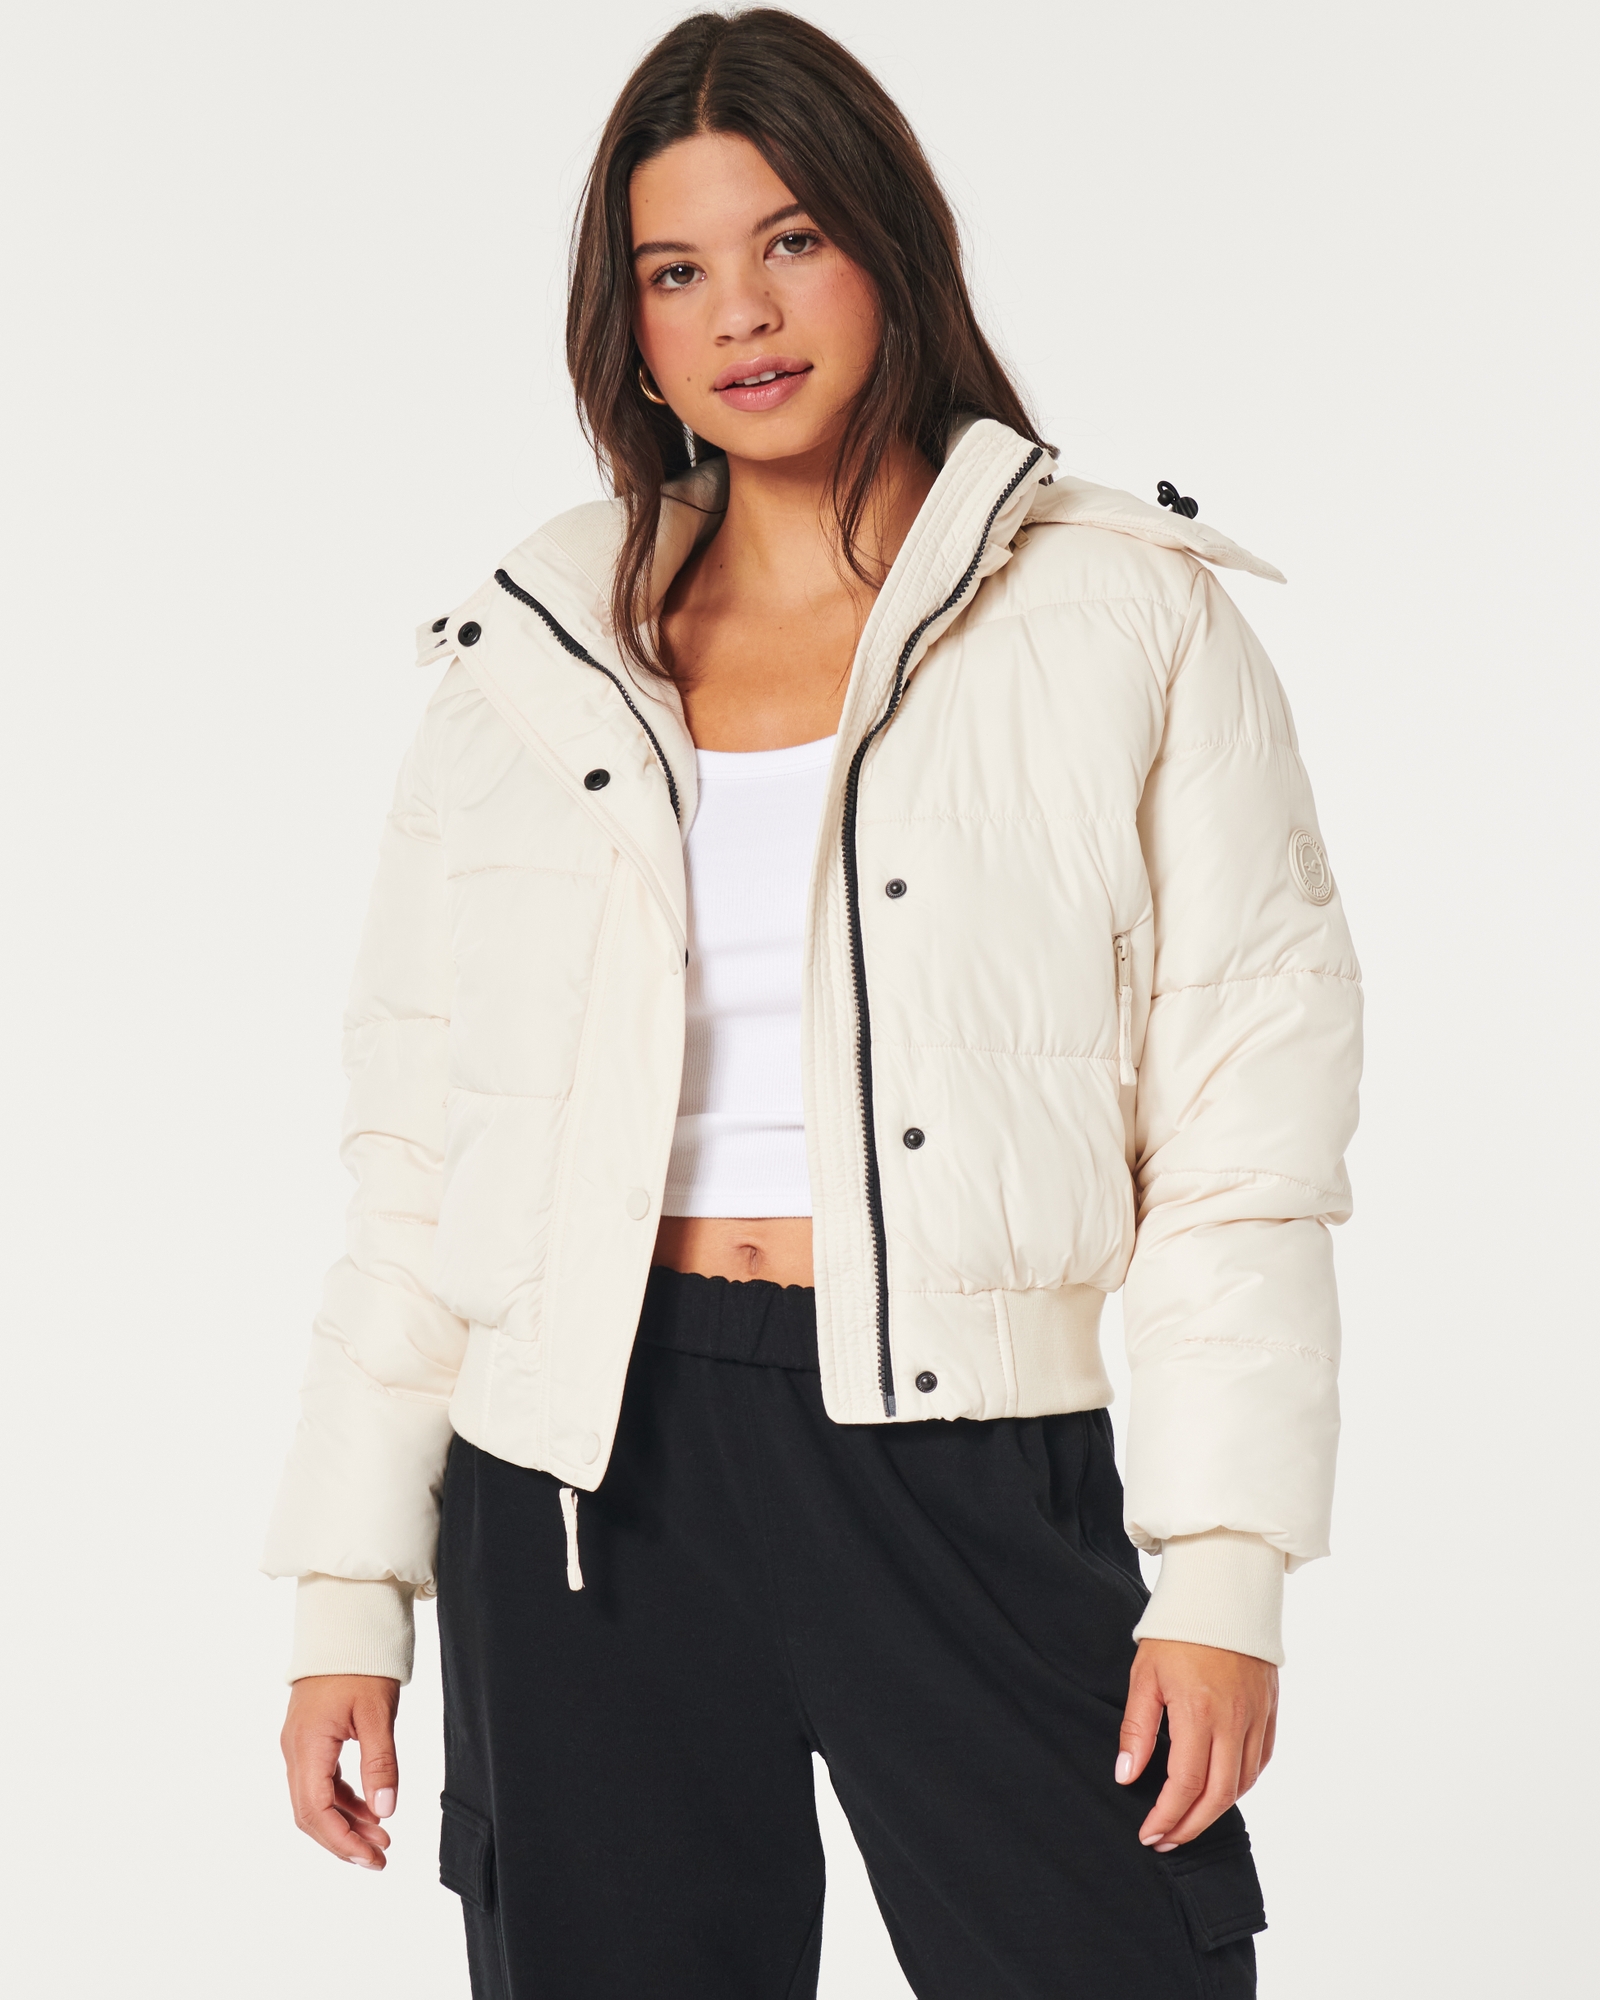 https://img.hollisterco.com/is/image/anf/KIC_344-3632-0015-178_model1.jpg?policy=product-extra-large